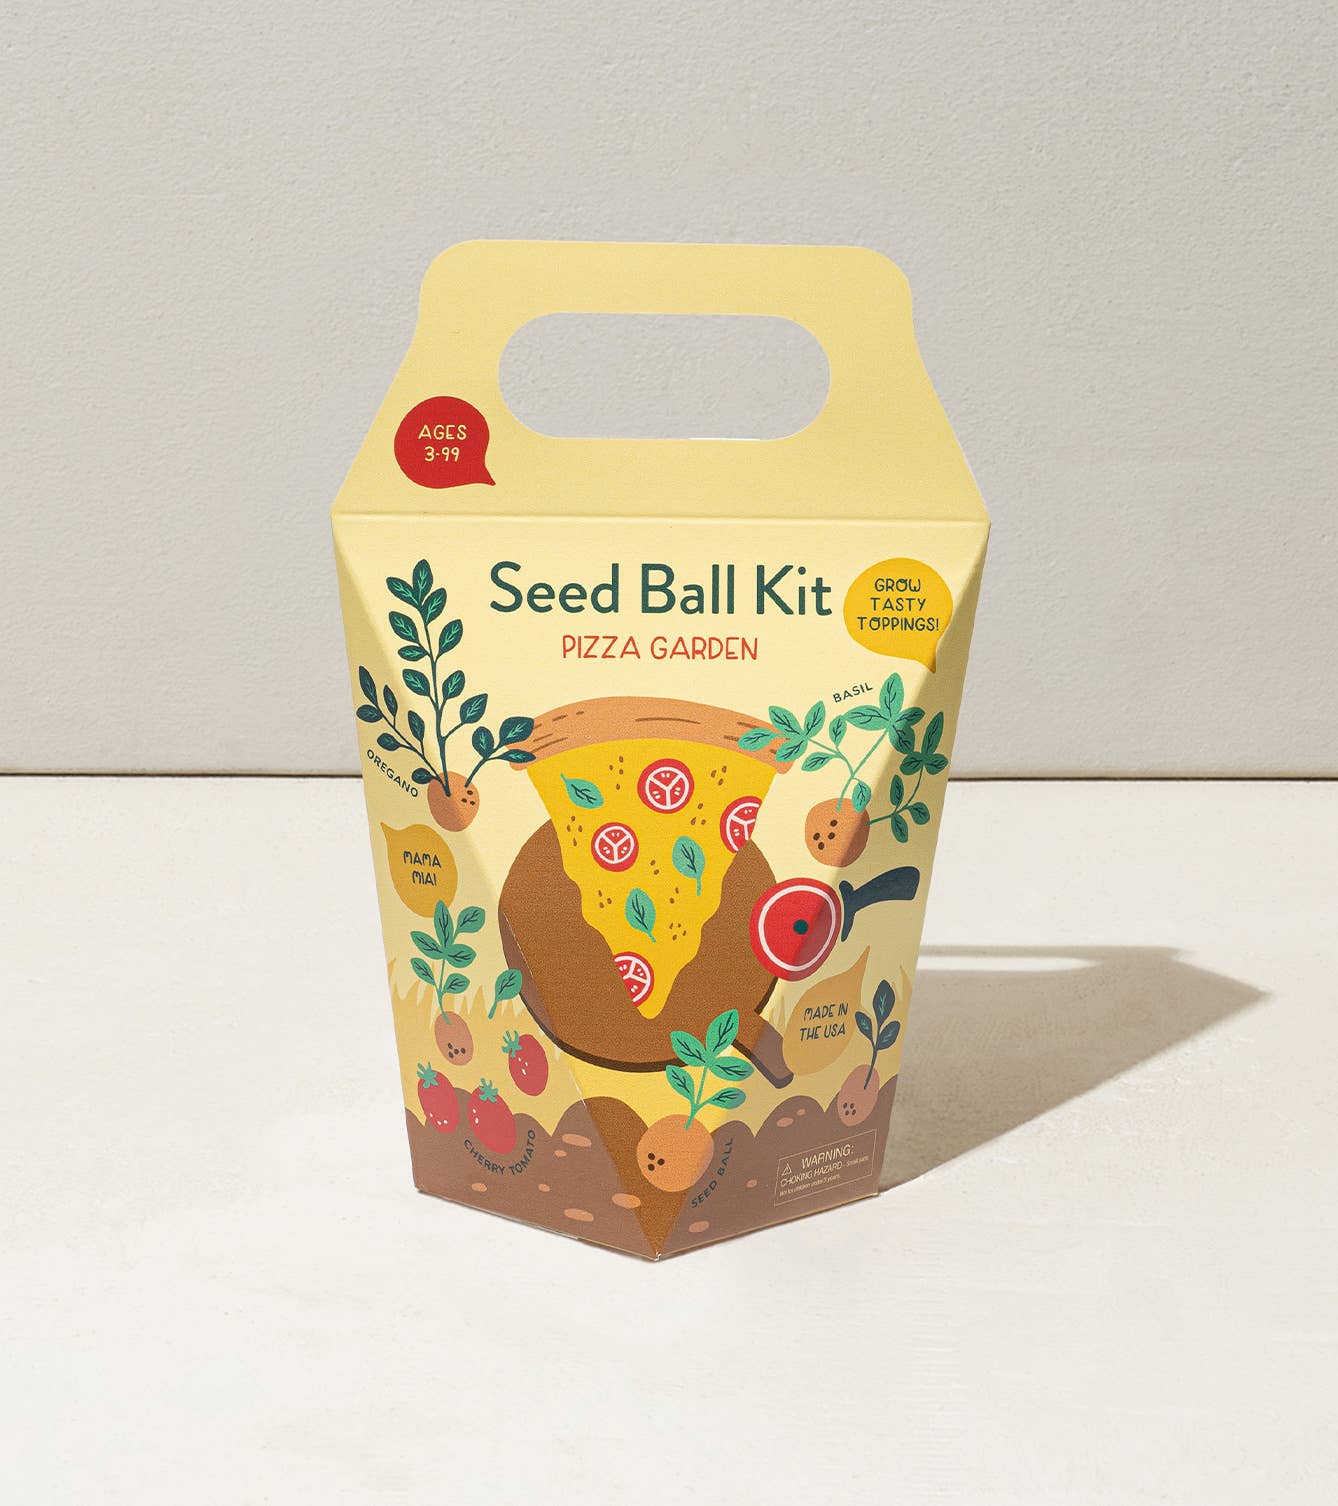 Modern Sprout - NEW DIY Seed Ball Kit - Pizza Garden